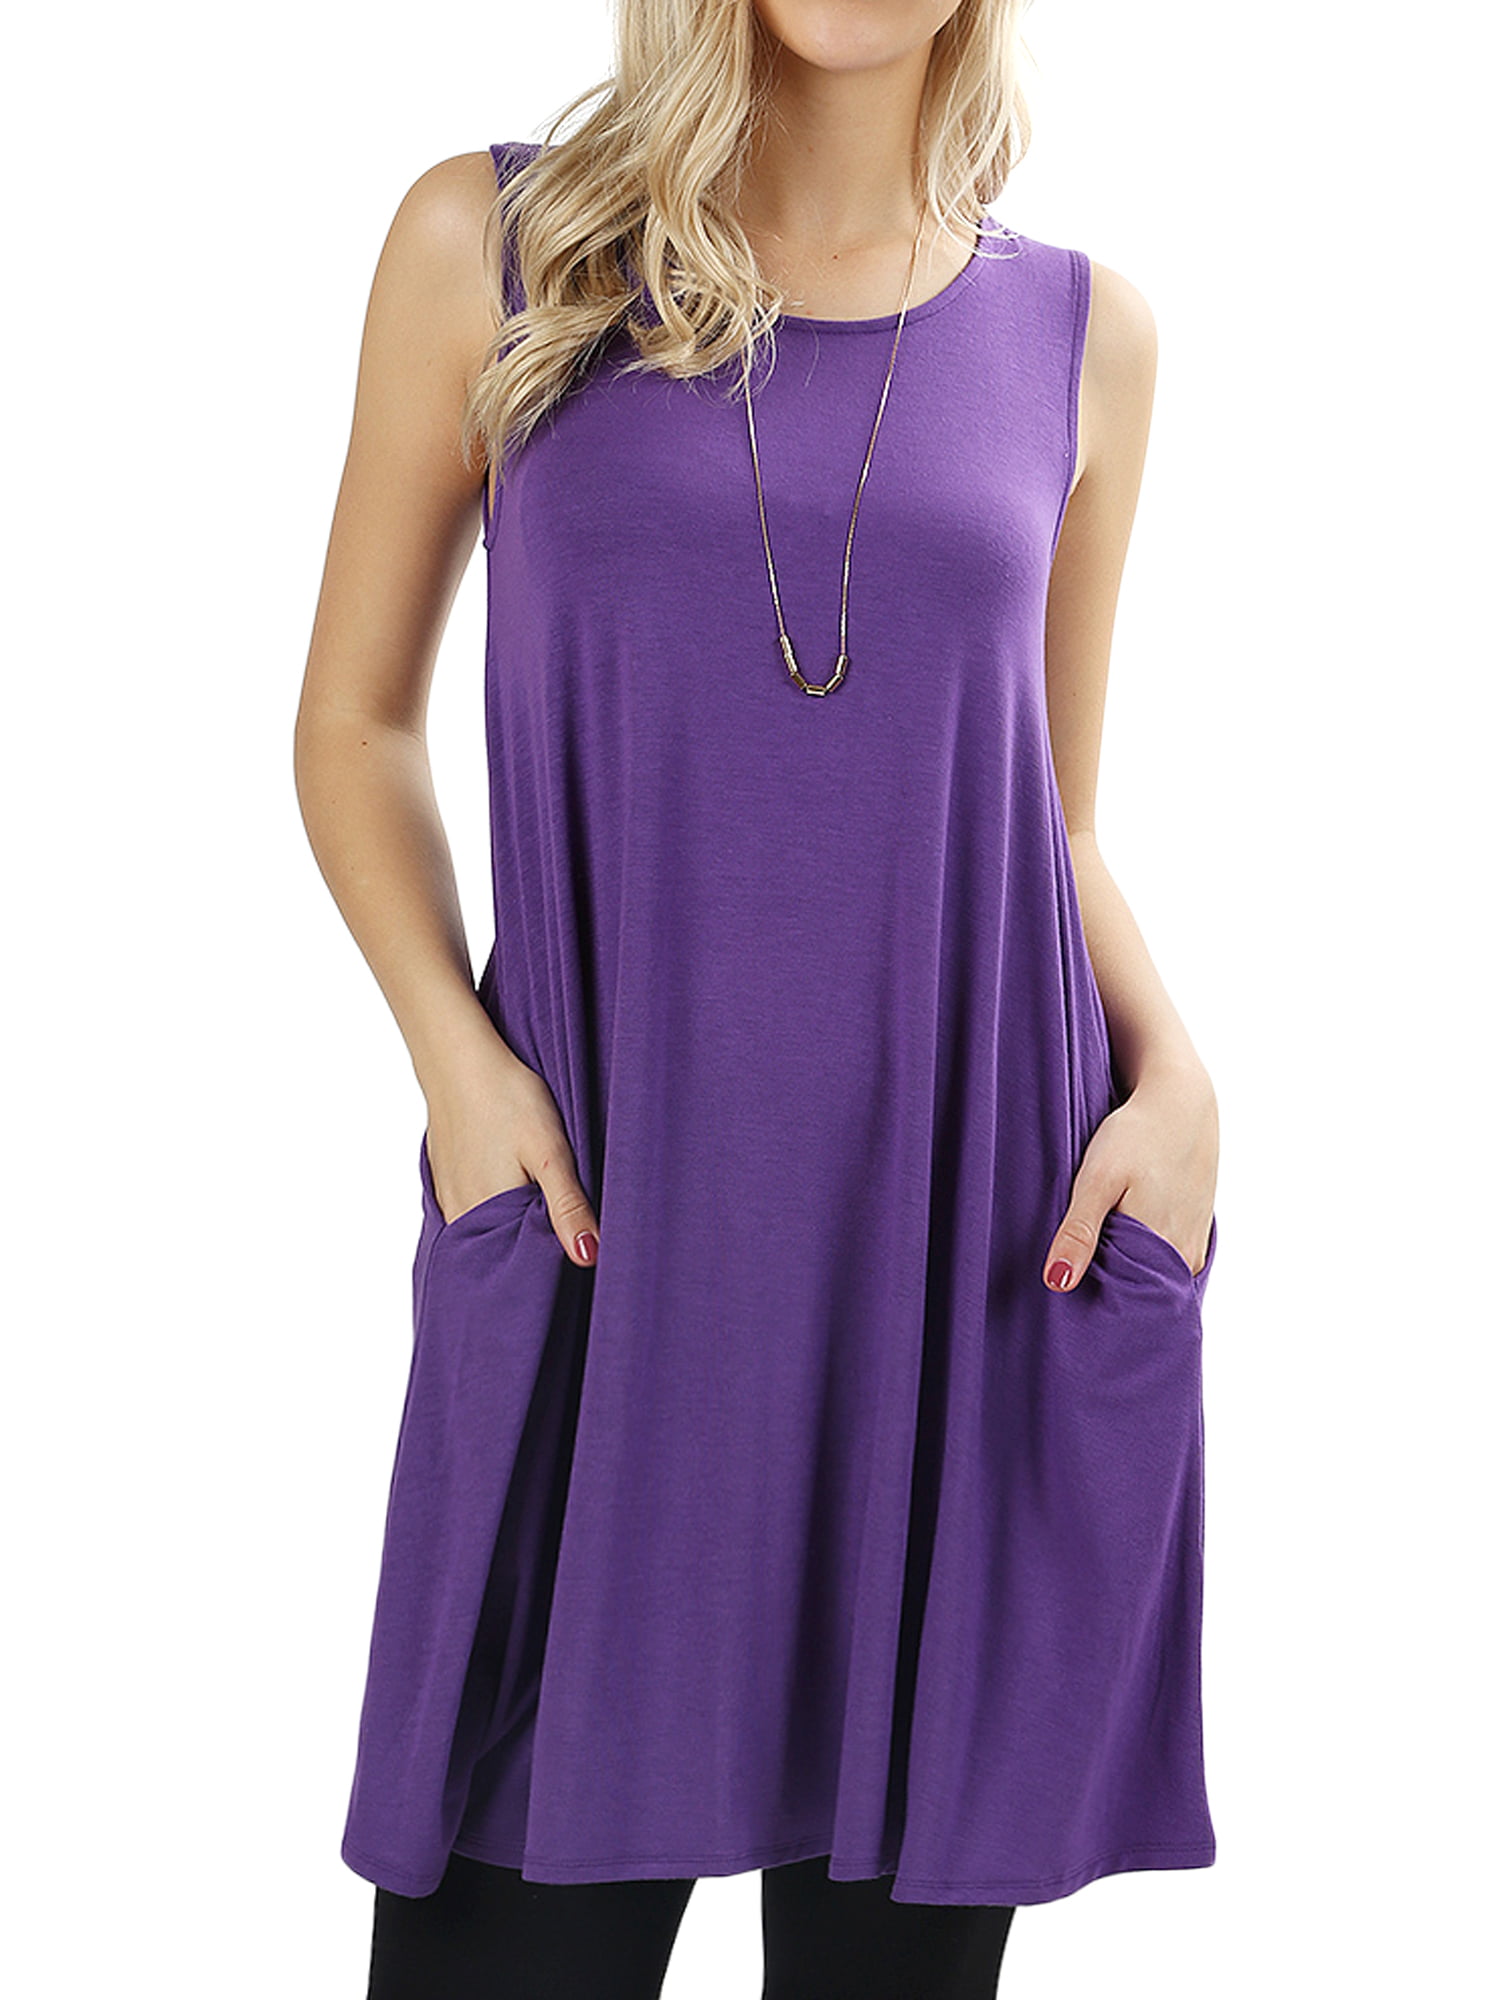 Women Round Neck Sleeveless Flowy Tunic Top with Side Pockets (Purple ...